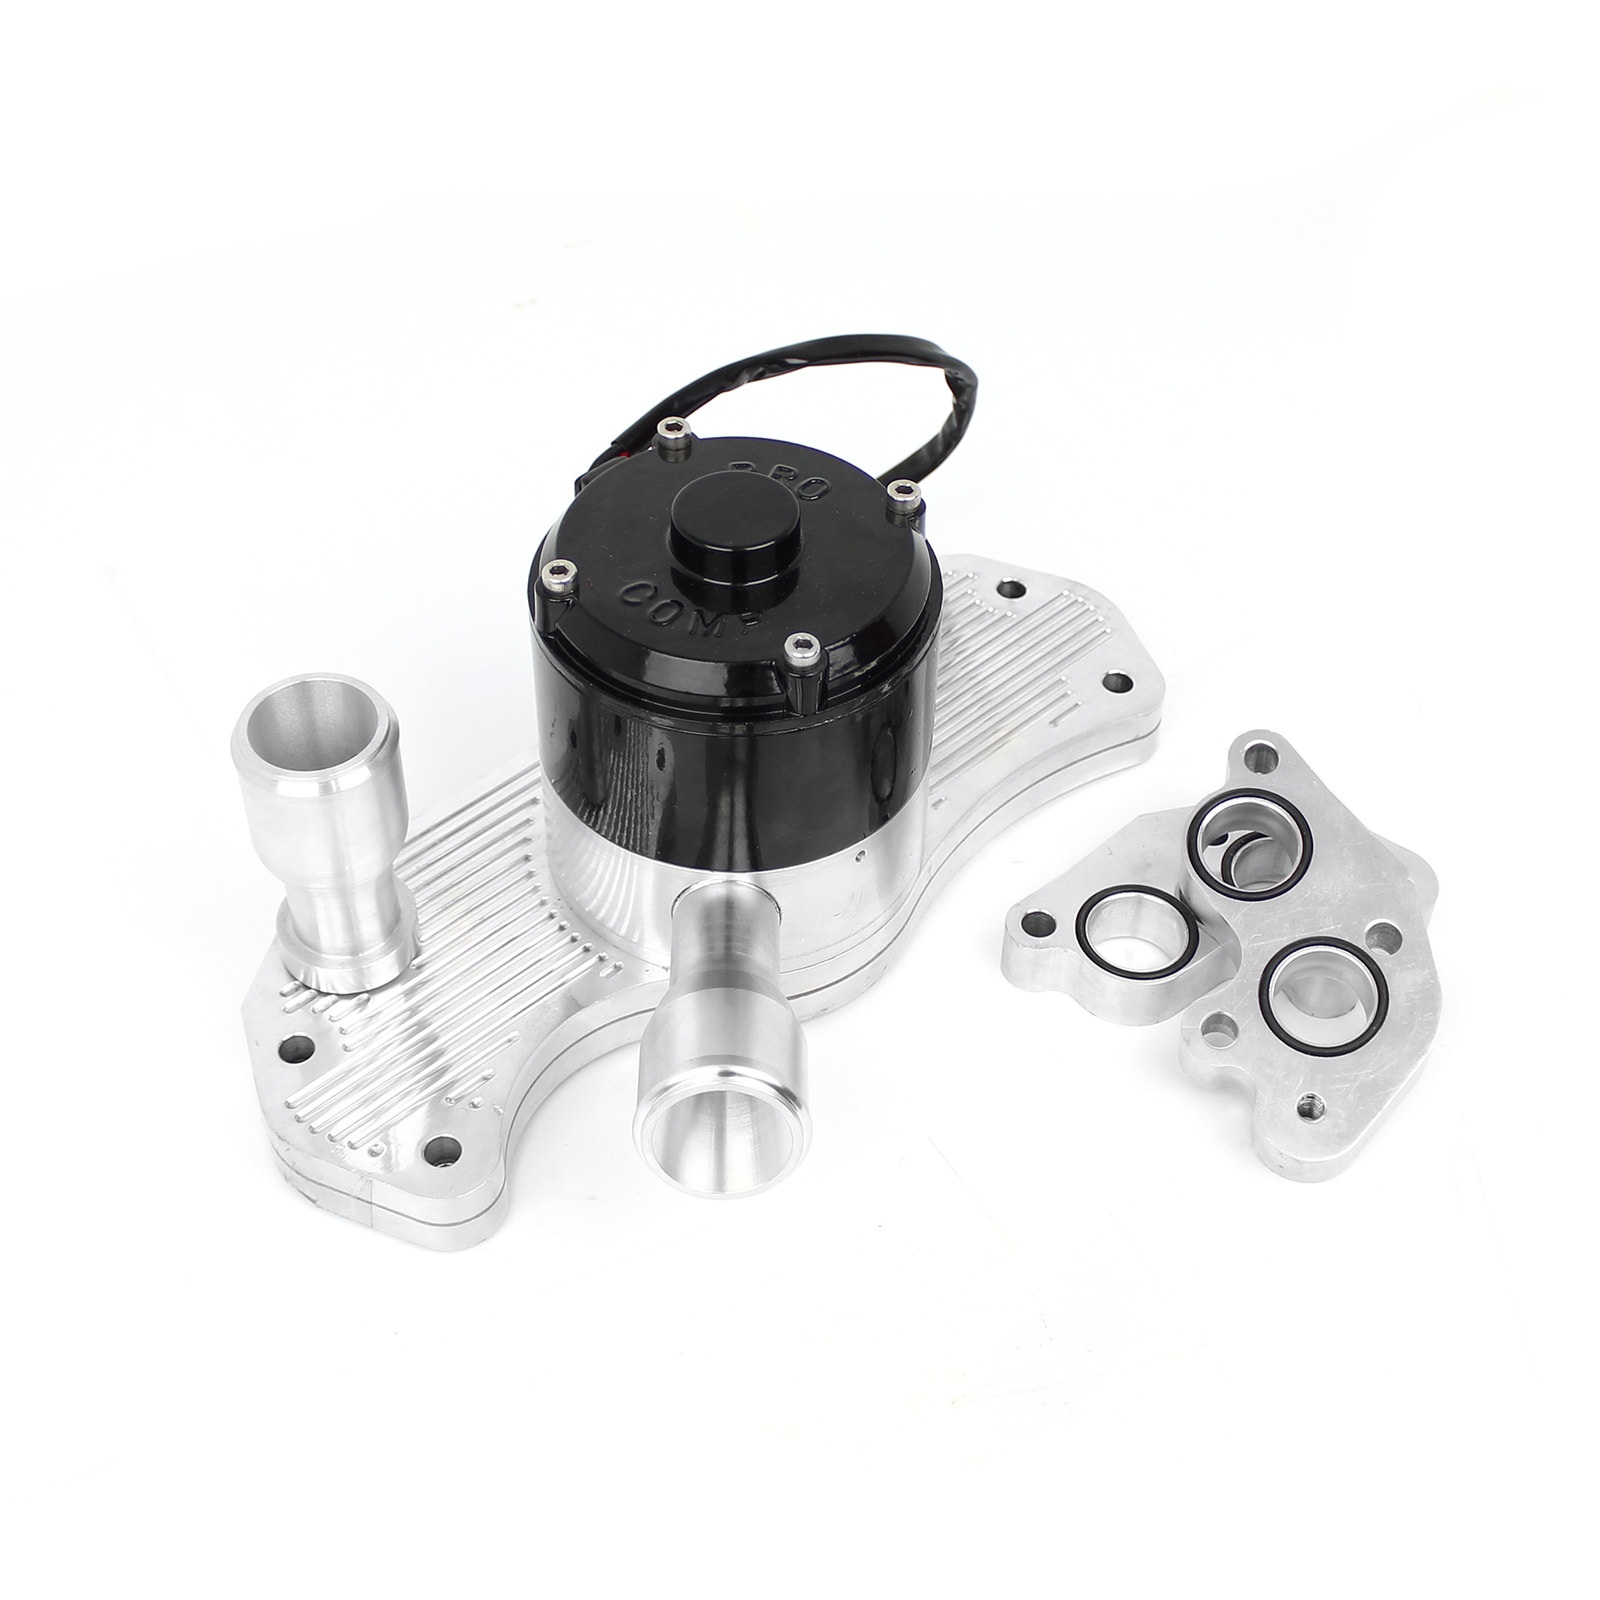 Chevy LS1 40+ GPM Slimline Electric Water Pump Polished Pump Material: Al.....